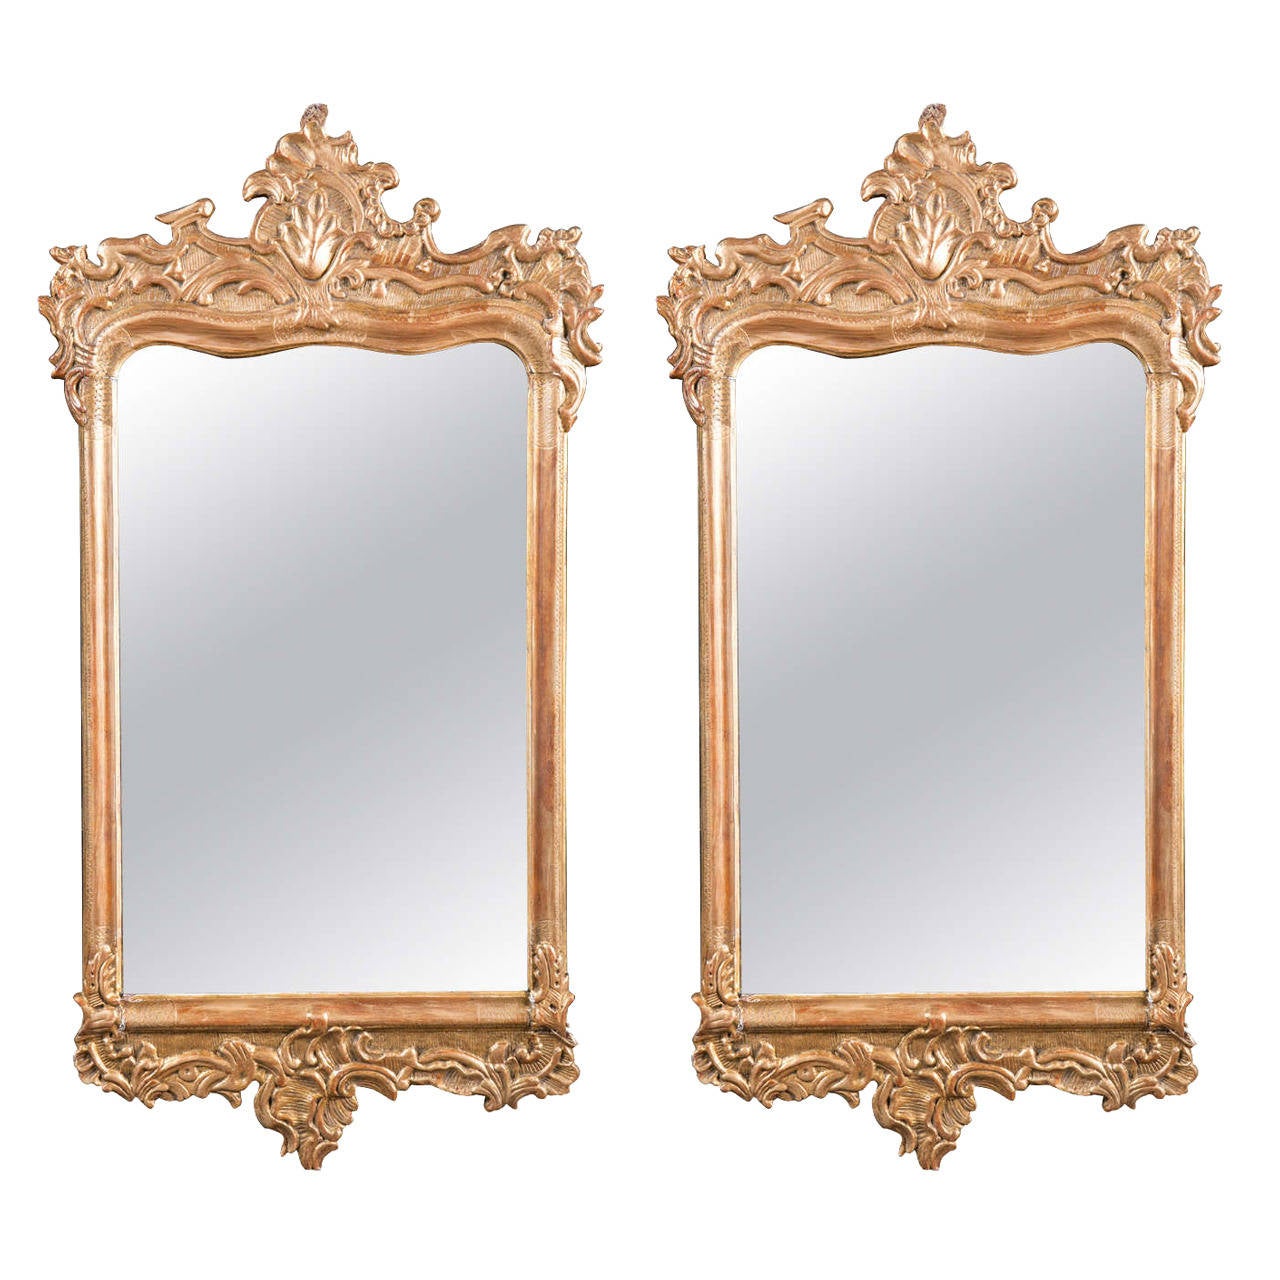 Pair of 19th Century Rococo Carved Wall Mirrors